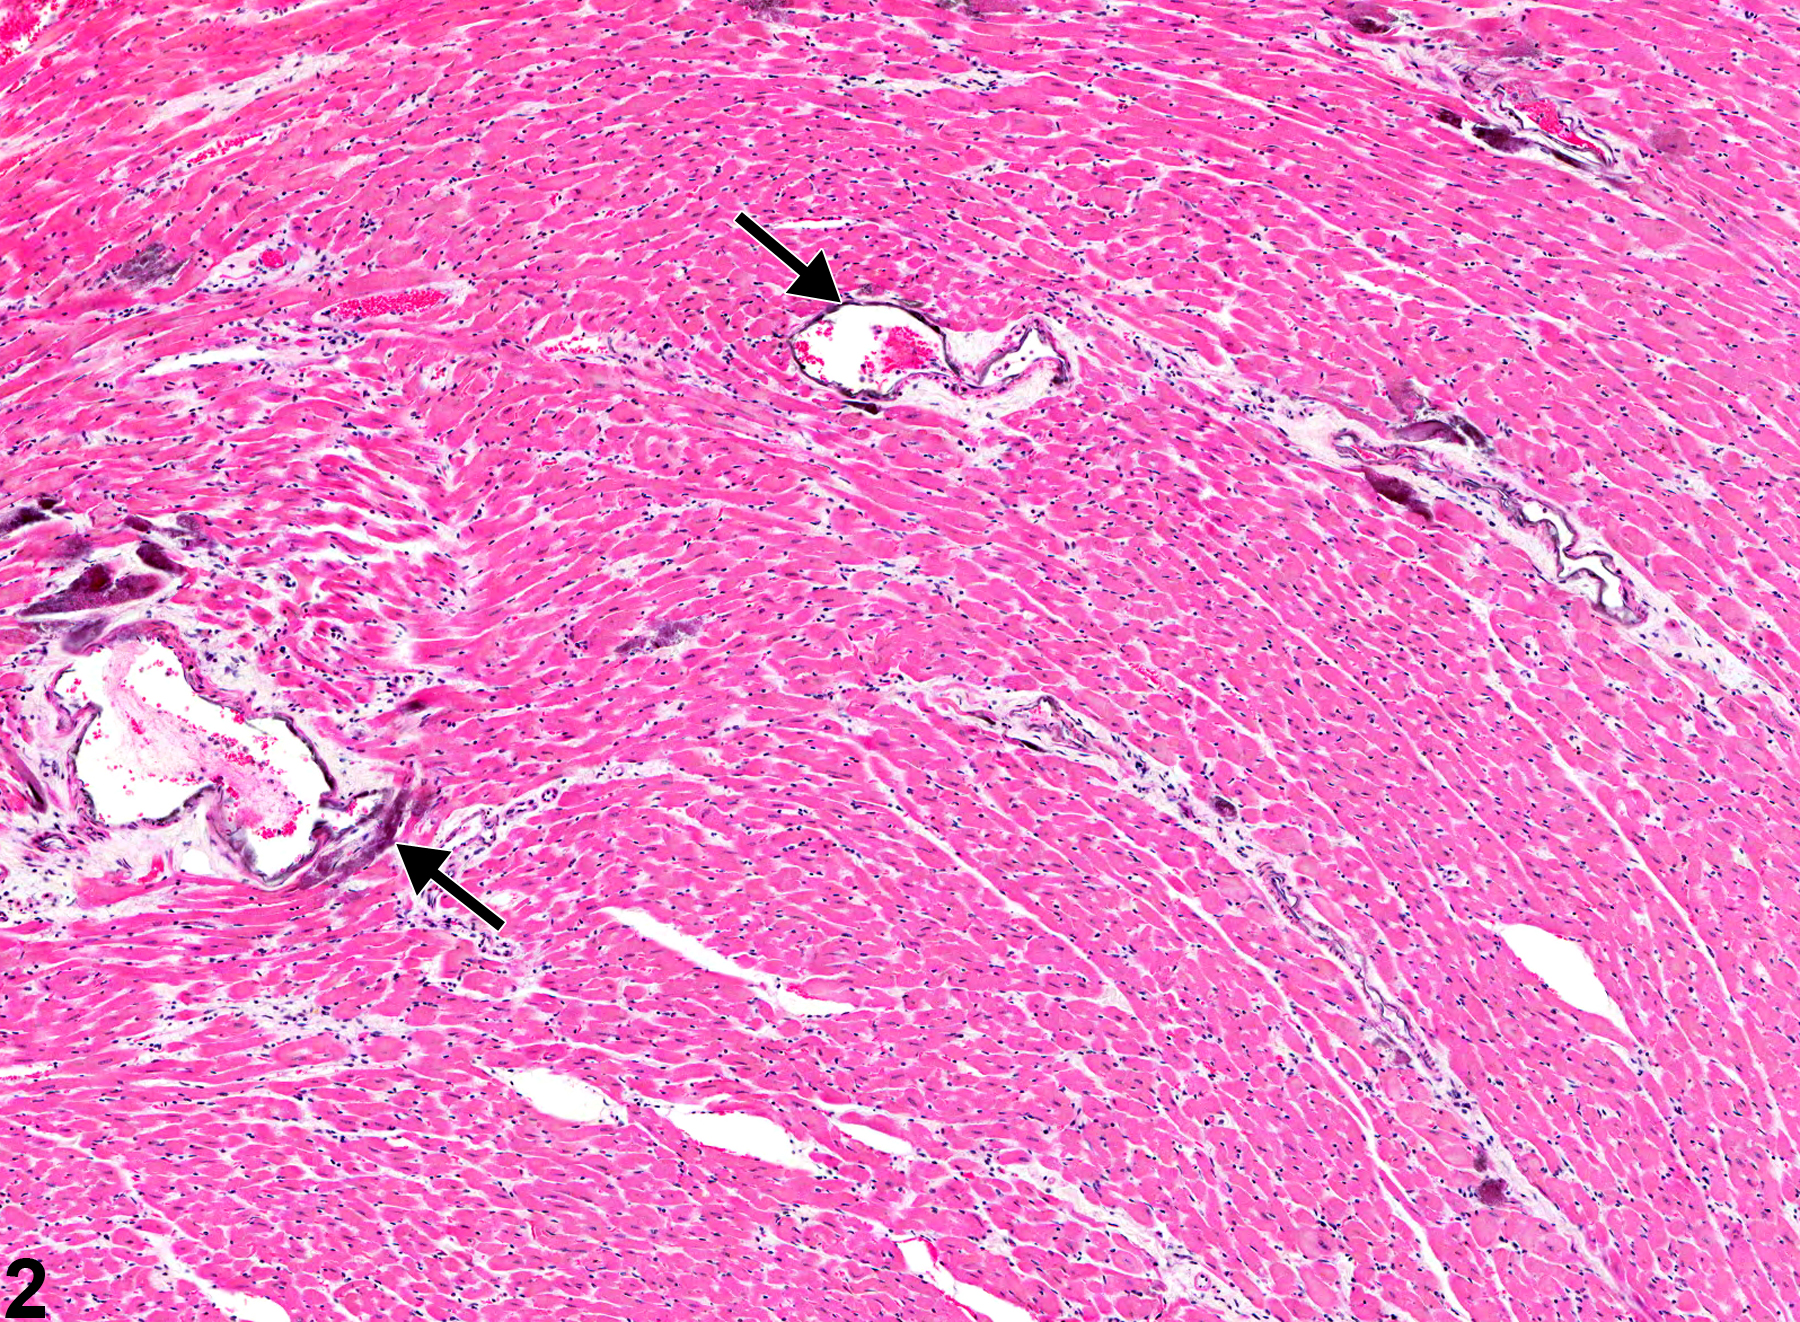 Image of mineral in the aorta from a male F344/N rat in a chronic study